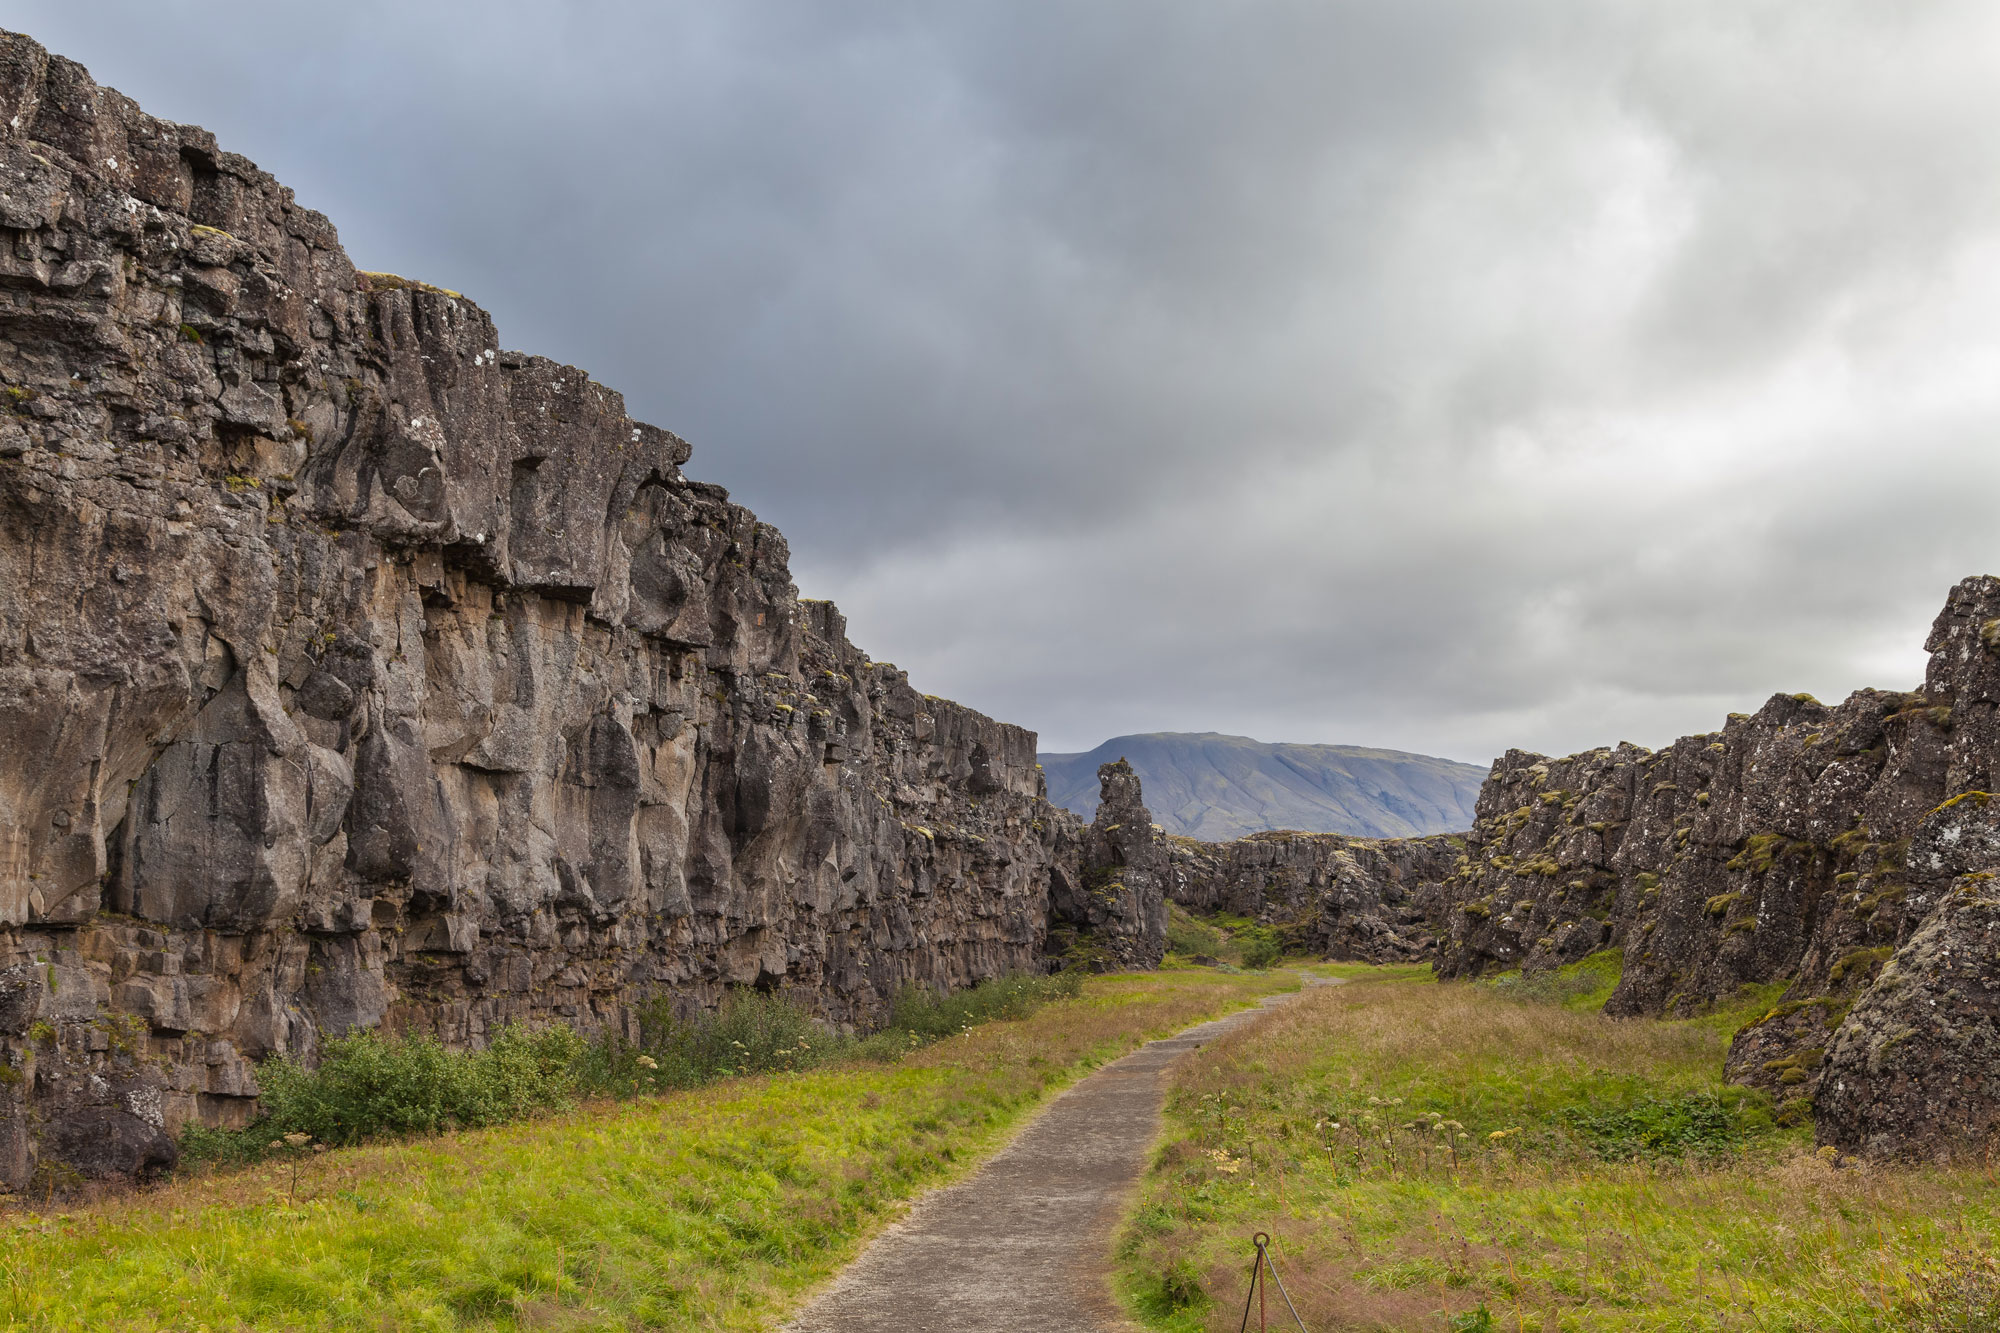 Photo of Almannagja fissure in Iceland showing a trail in a valley with steep cliffs on the right and shorter cliffs on the left. This rift is part of the Mid-Atlantic Ridge.